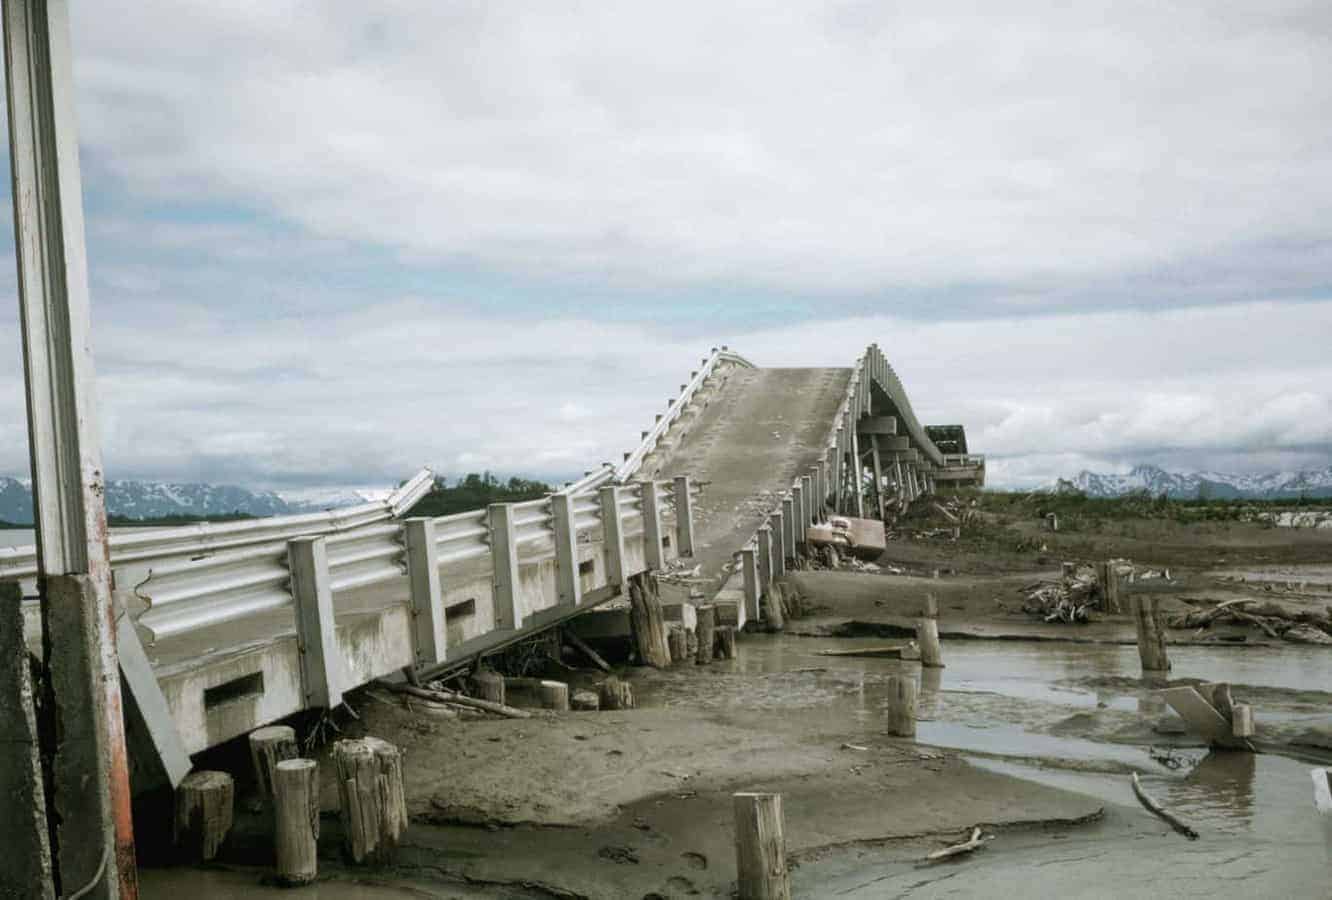 Bridges With Limb-Inspired Architecture Could Withstand Earthquakes, Cut Repair Costs